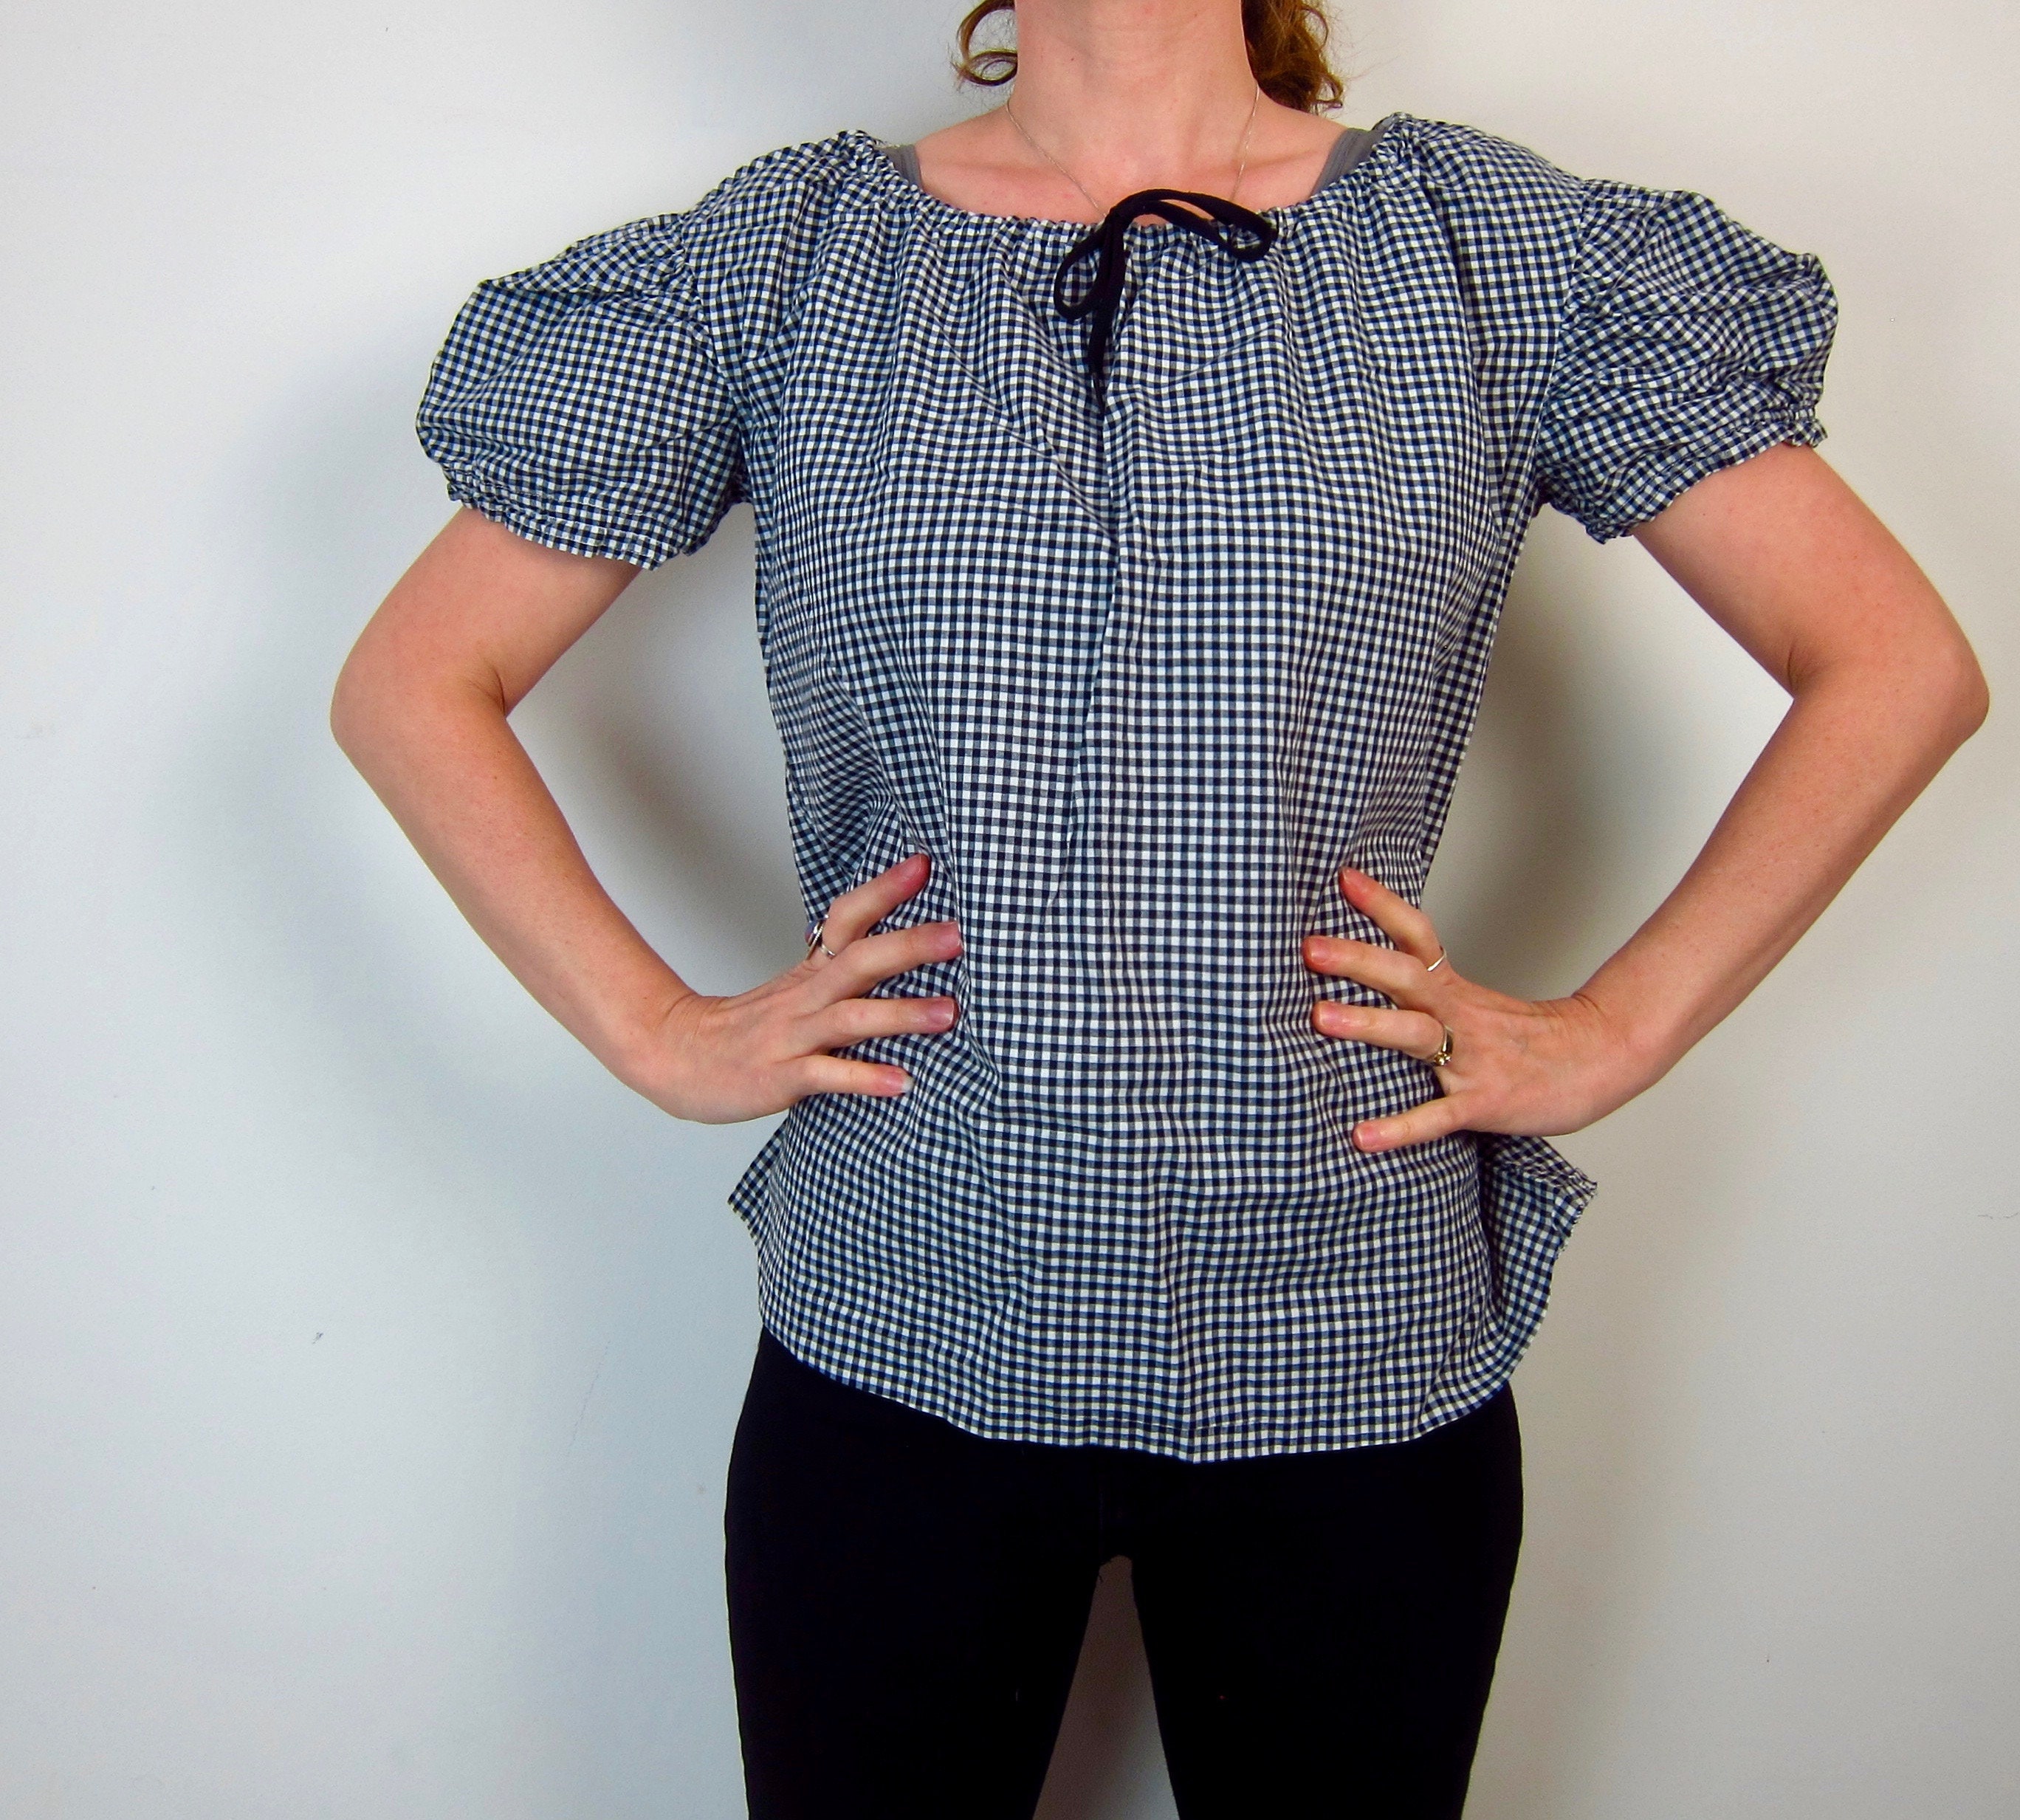 Puff Sleeve Check Top 80s Black White Checkered Shirt Mod | Etsy